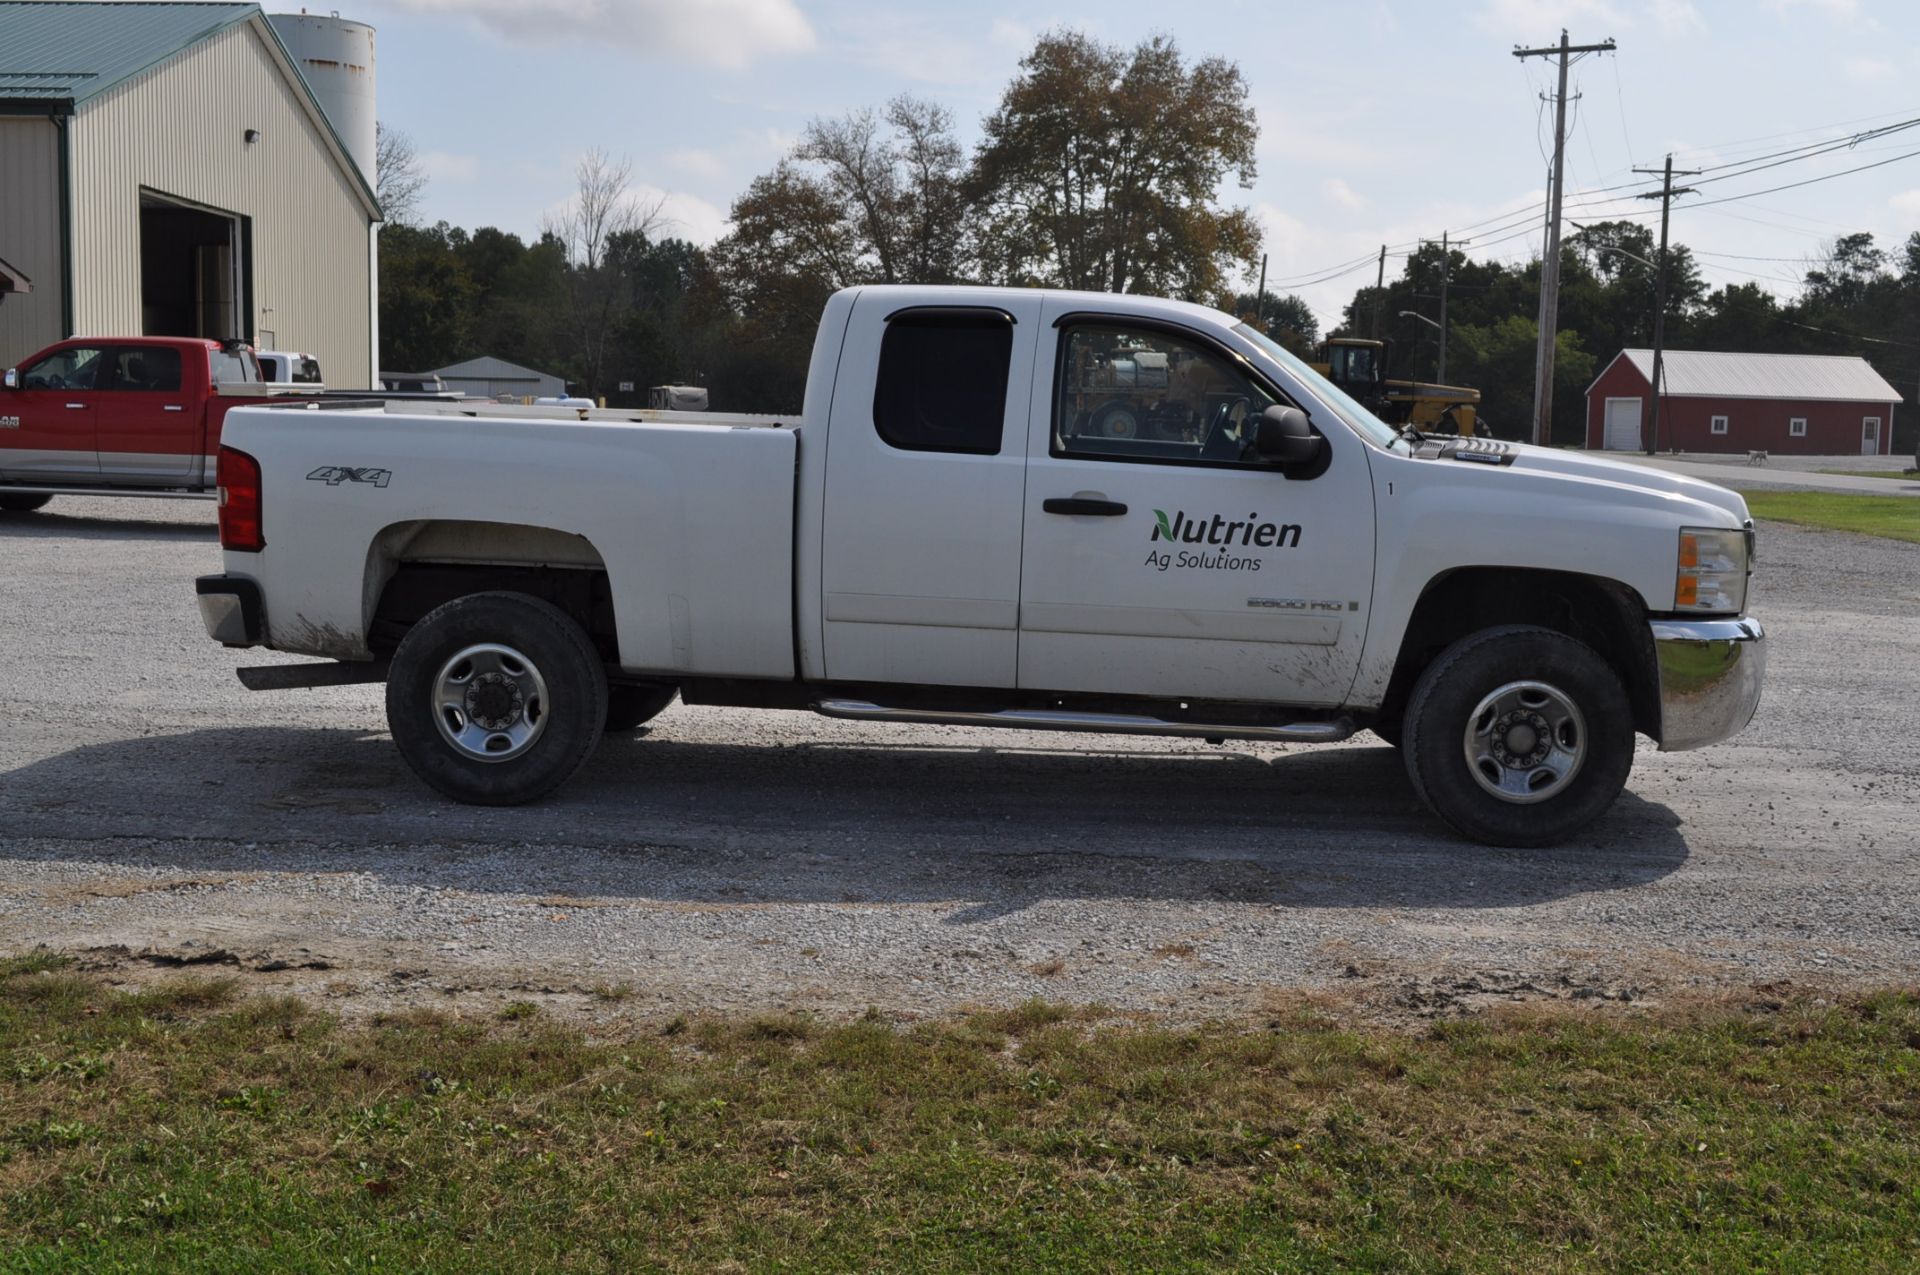 2007 Chevy 2500HD, 4x4 short bed, ext cab, gas V-8, Auto, electric brake controller, 265/75R16, - Image 4 of 13